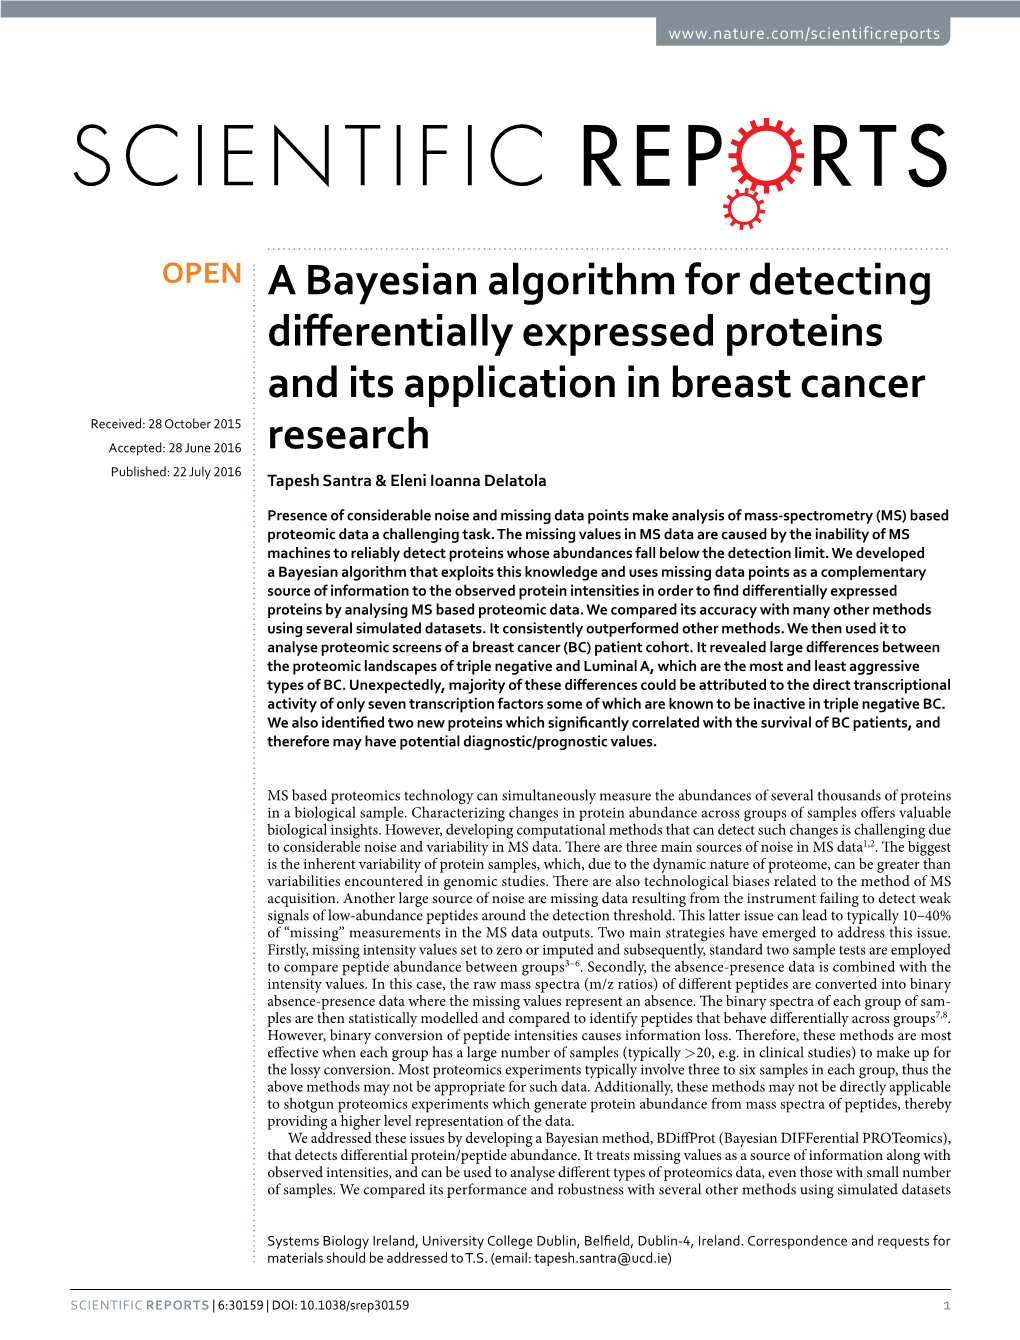 A Bayesian Algorithm for Detecting Differentially Expressed